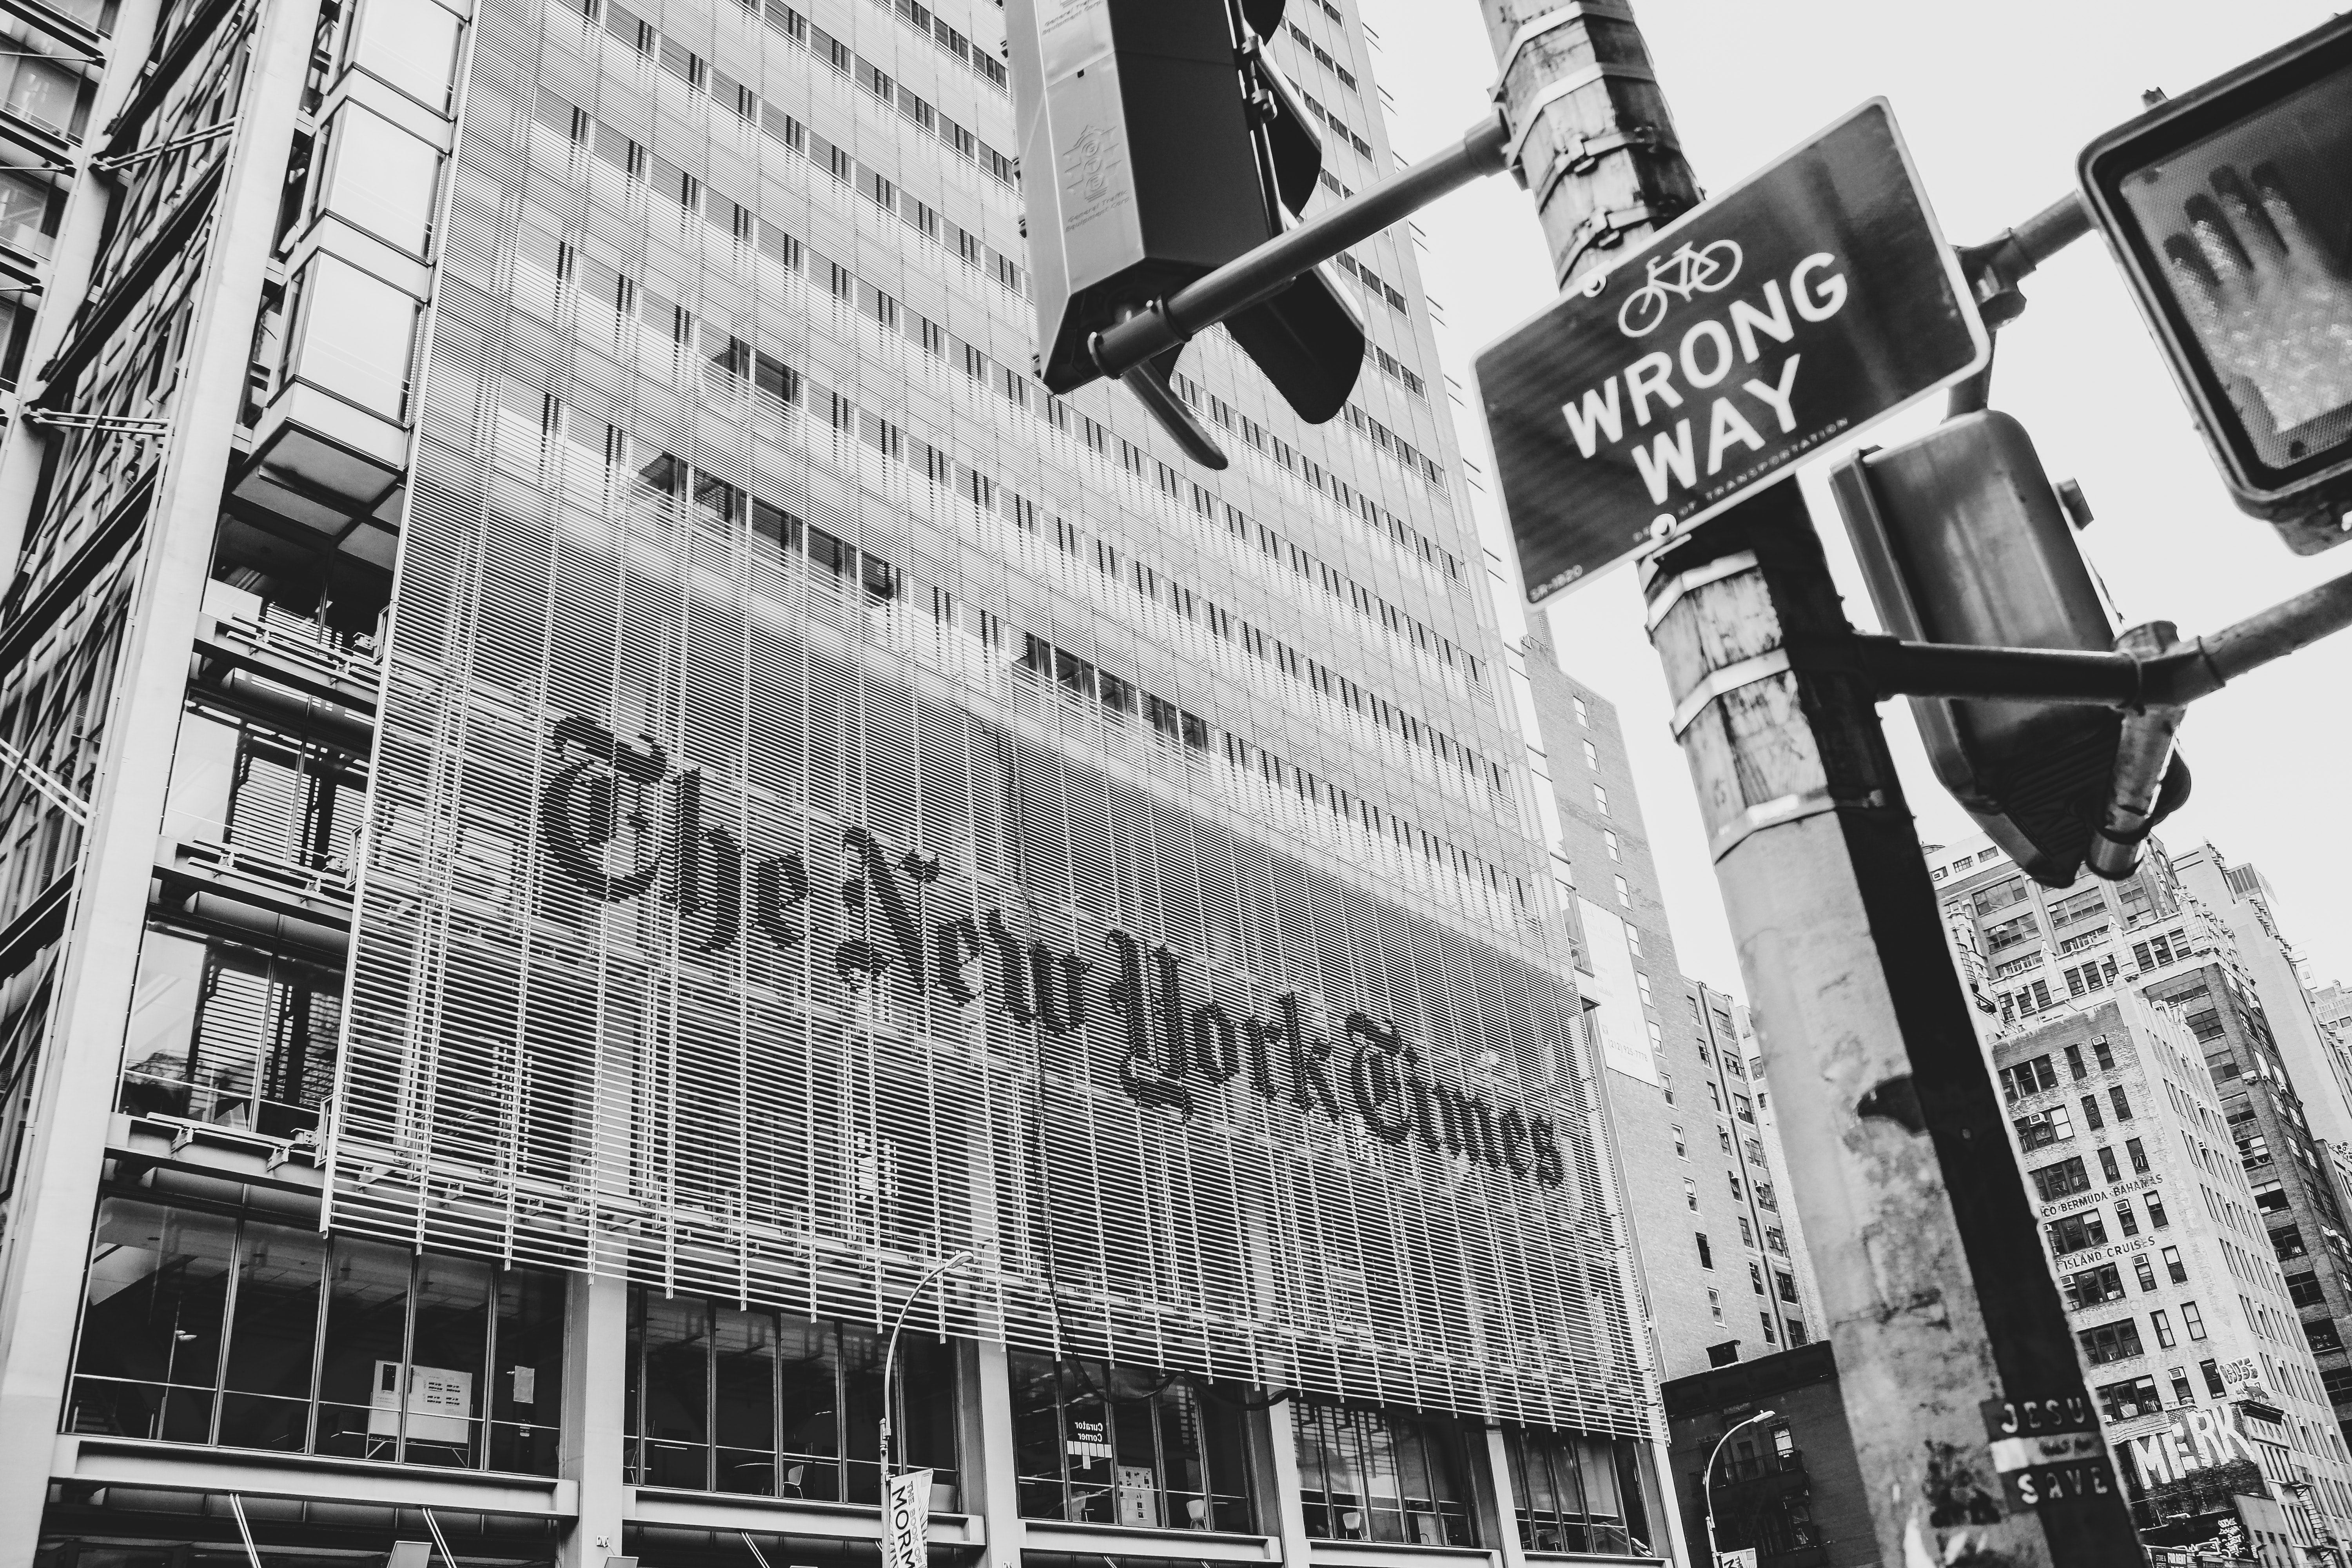 A black and white photo of a building that says The New York Times in lettering the size of a story or two. A sign on the street says "Wrong Way."